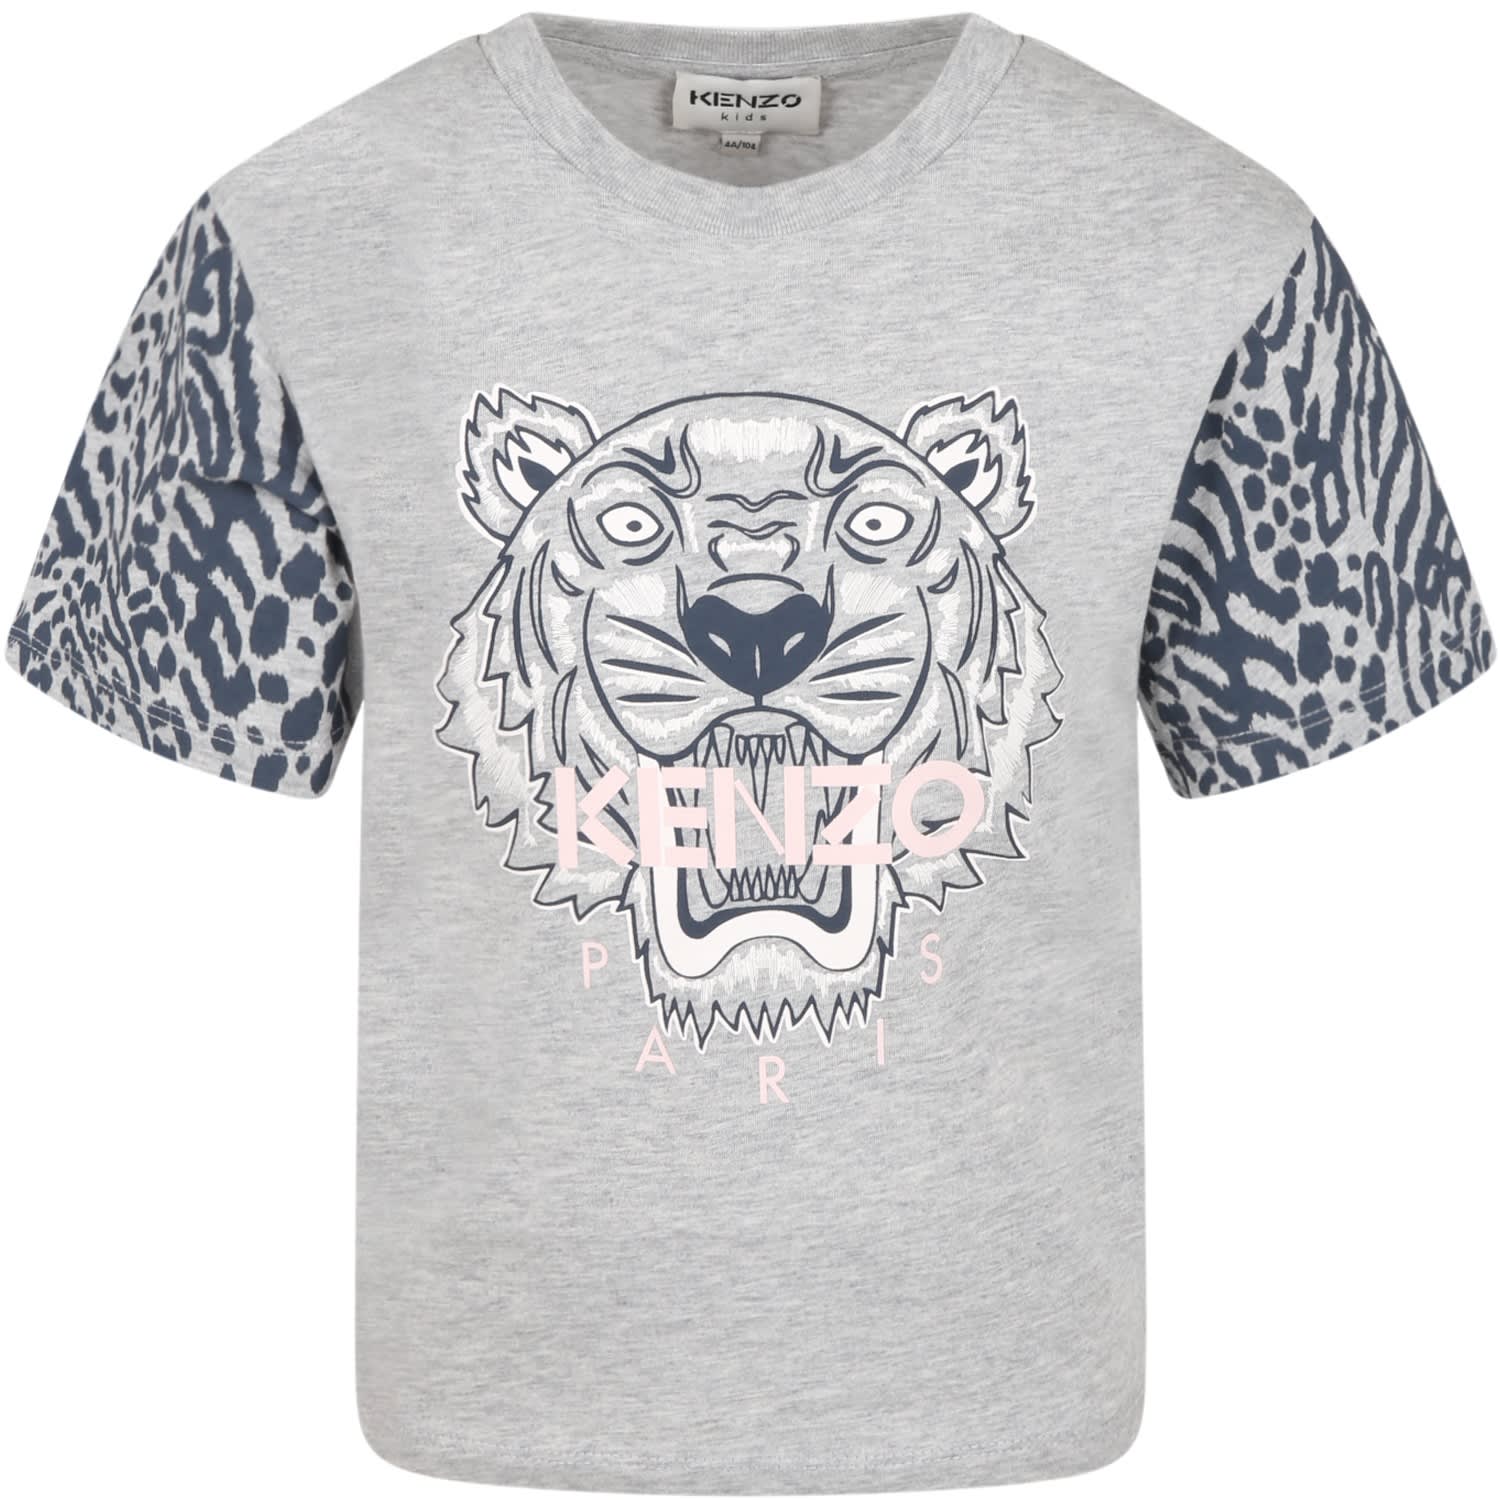 Kenzo Kids Grey T-shirt For Girl With Tiger